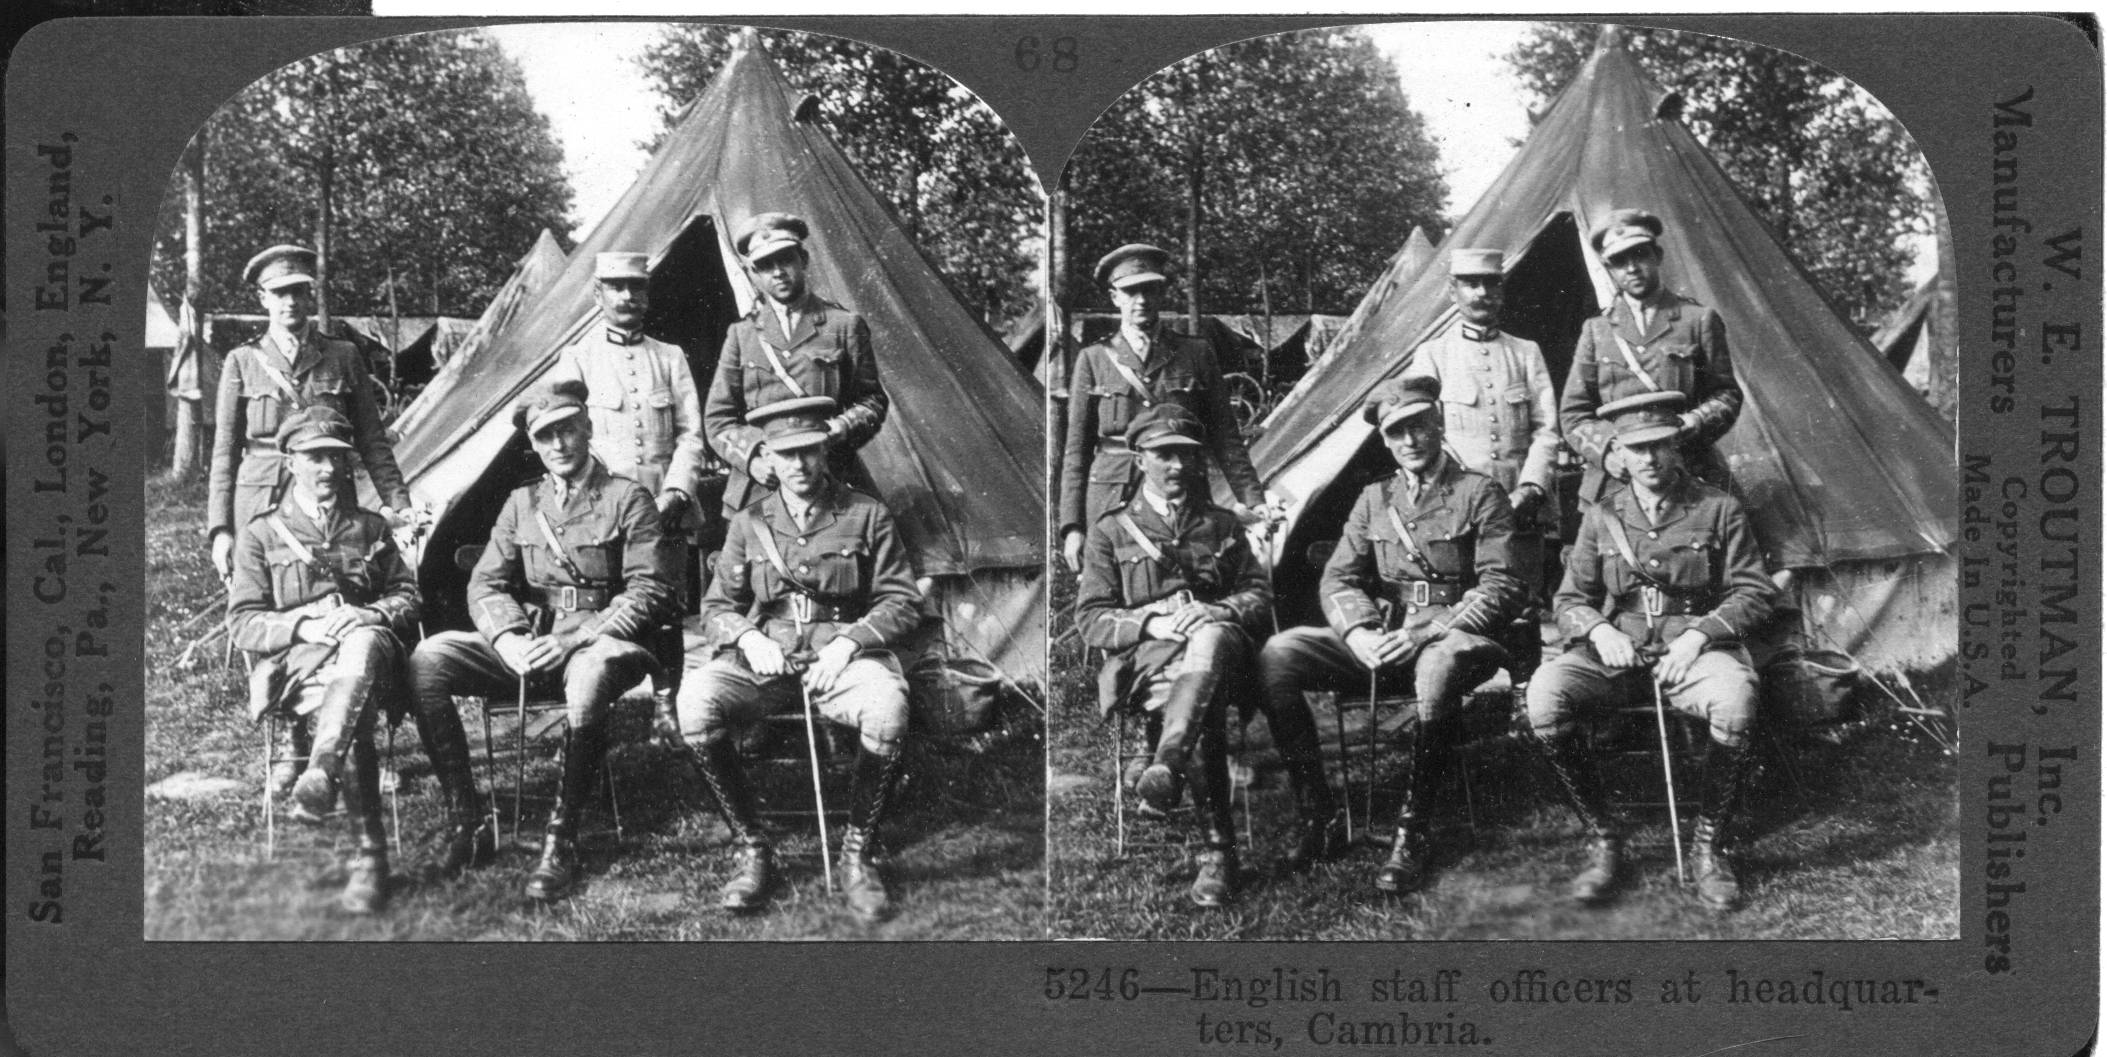 English staff officers at headquarters, Cambria (sic)